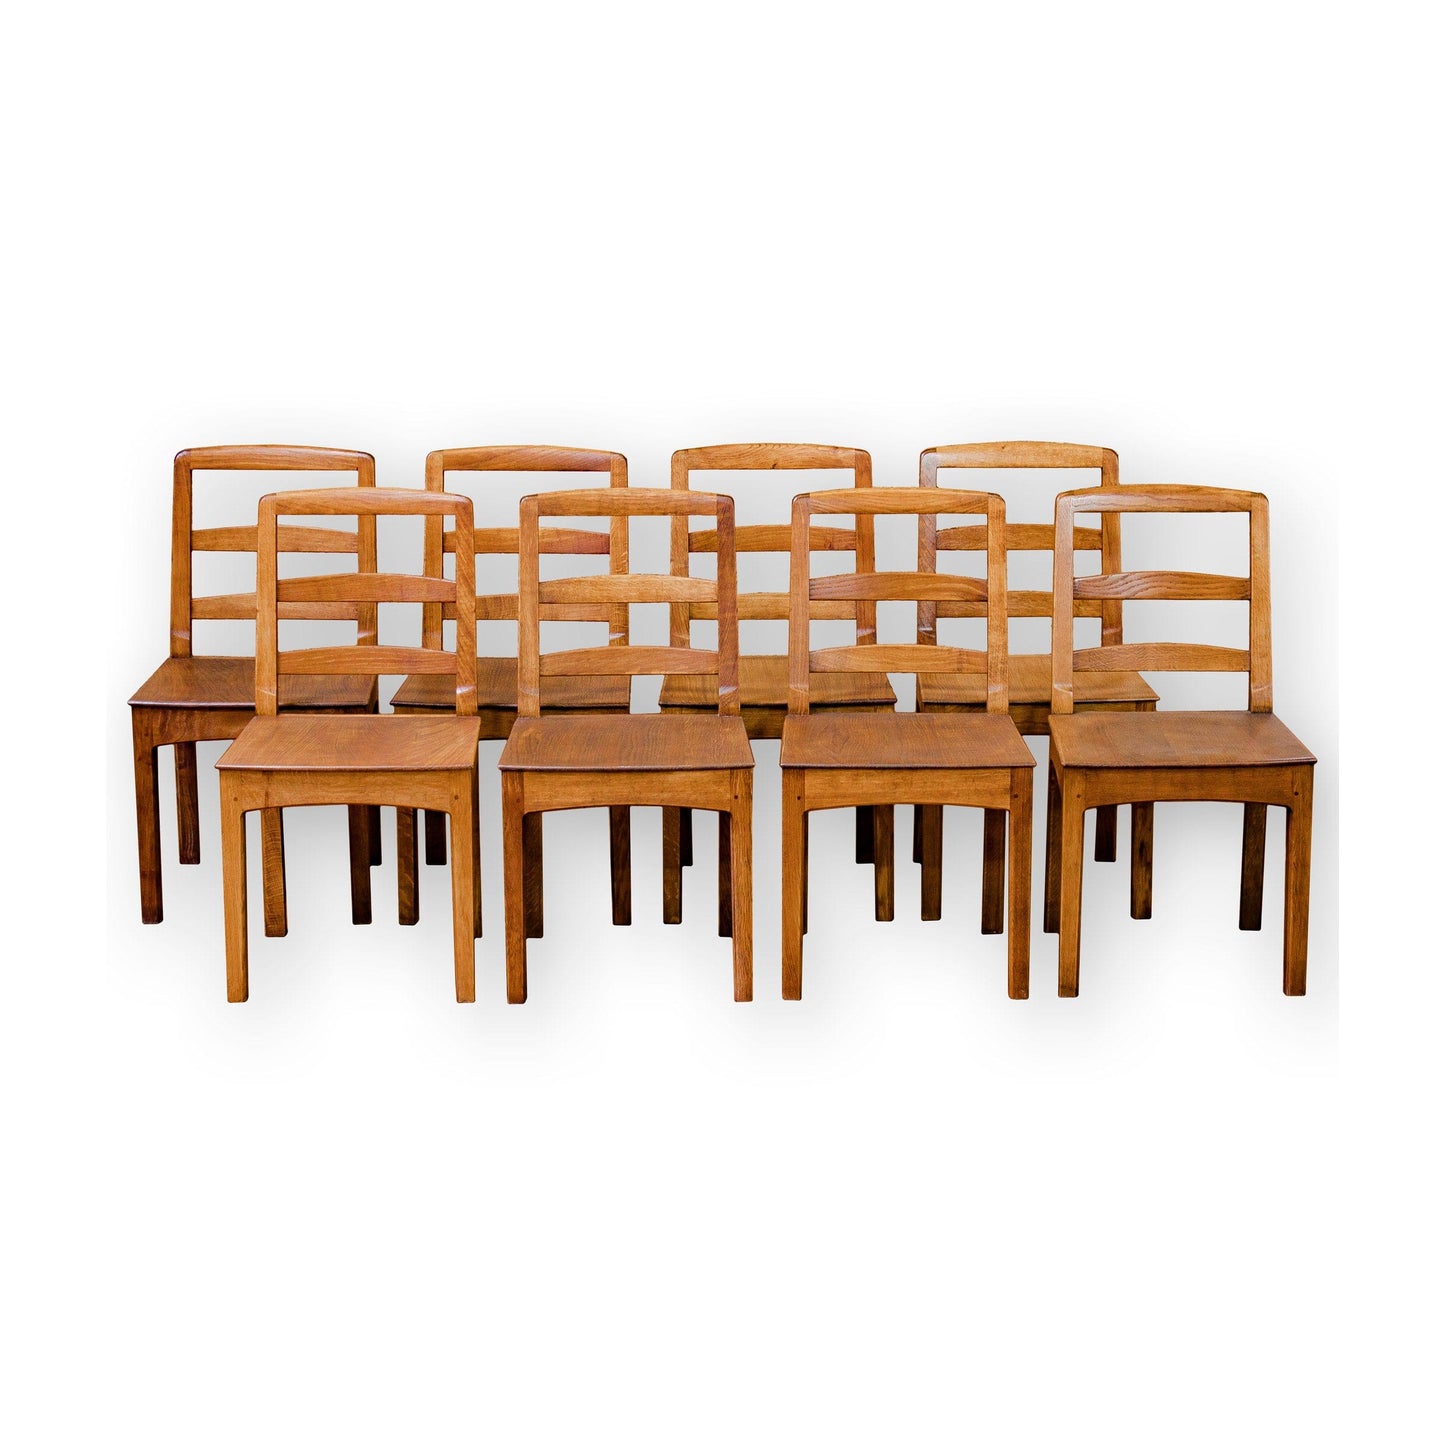 Set of 8 Peter Hall Arts & Crafts Lakes School English Oak Arched Rail Chairs.